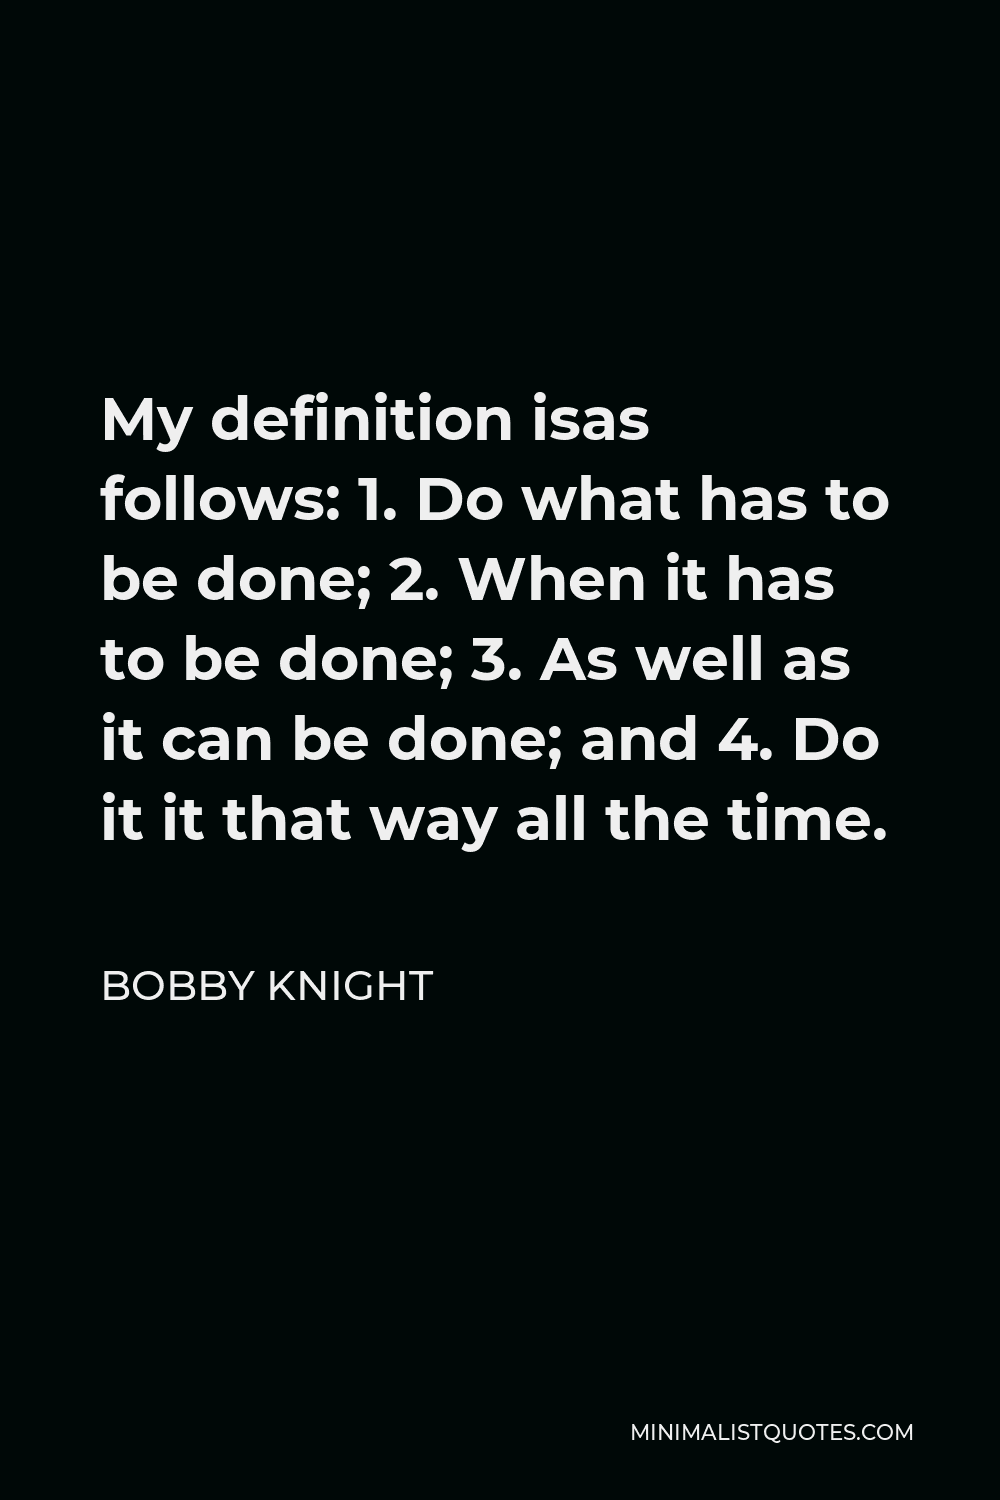 Bobby Knight Quote - My definition isas follows: 1. Do what has to be done; 2. When it has to be done; 3. As well as it can be done; and 4. Do it it that way all the time.